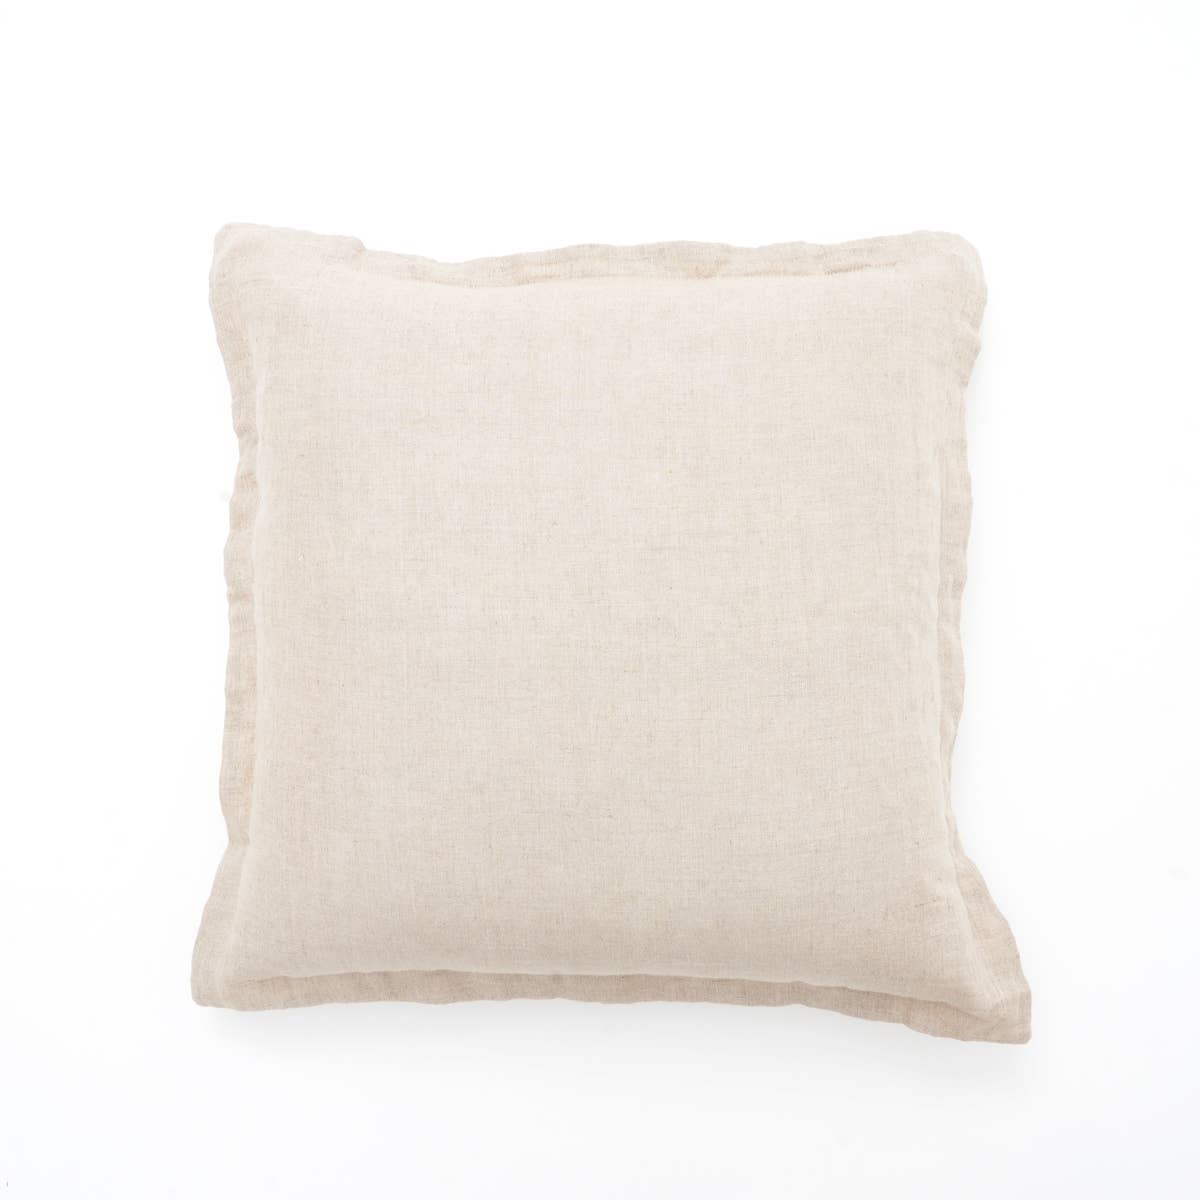 Linen Solid Cushion with Flanges - Pillows